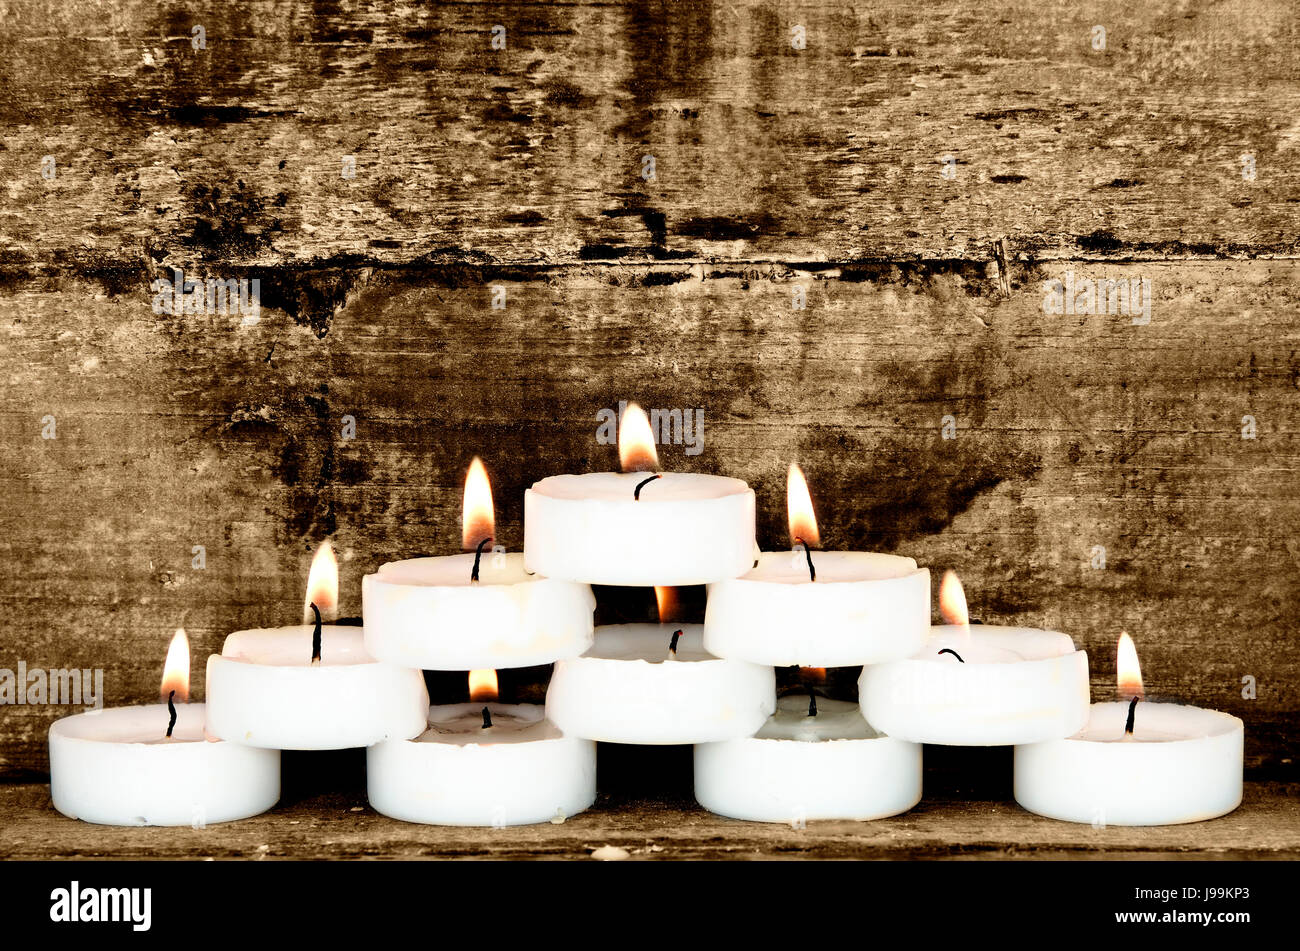 candle, pyramid, deco, flame, flames, wooden, zen, light, candle, pyramid, Stock Photo